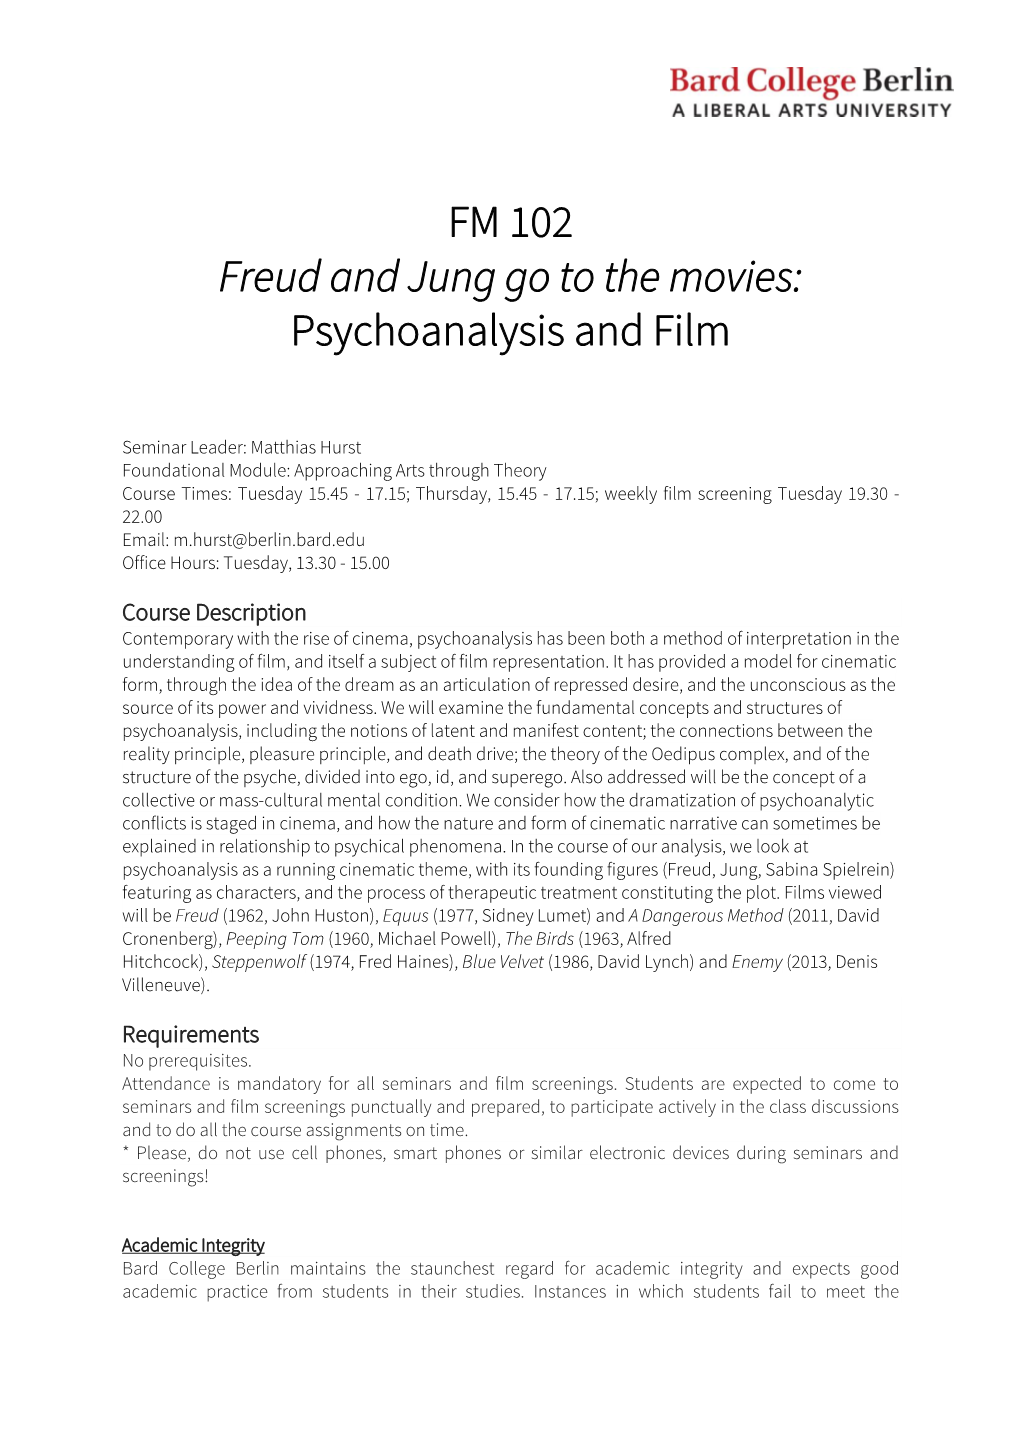 FM 102 Freud and Jung Go to the Movies: Psychoanalysis and Film